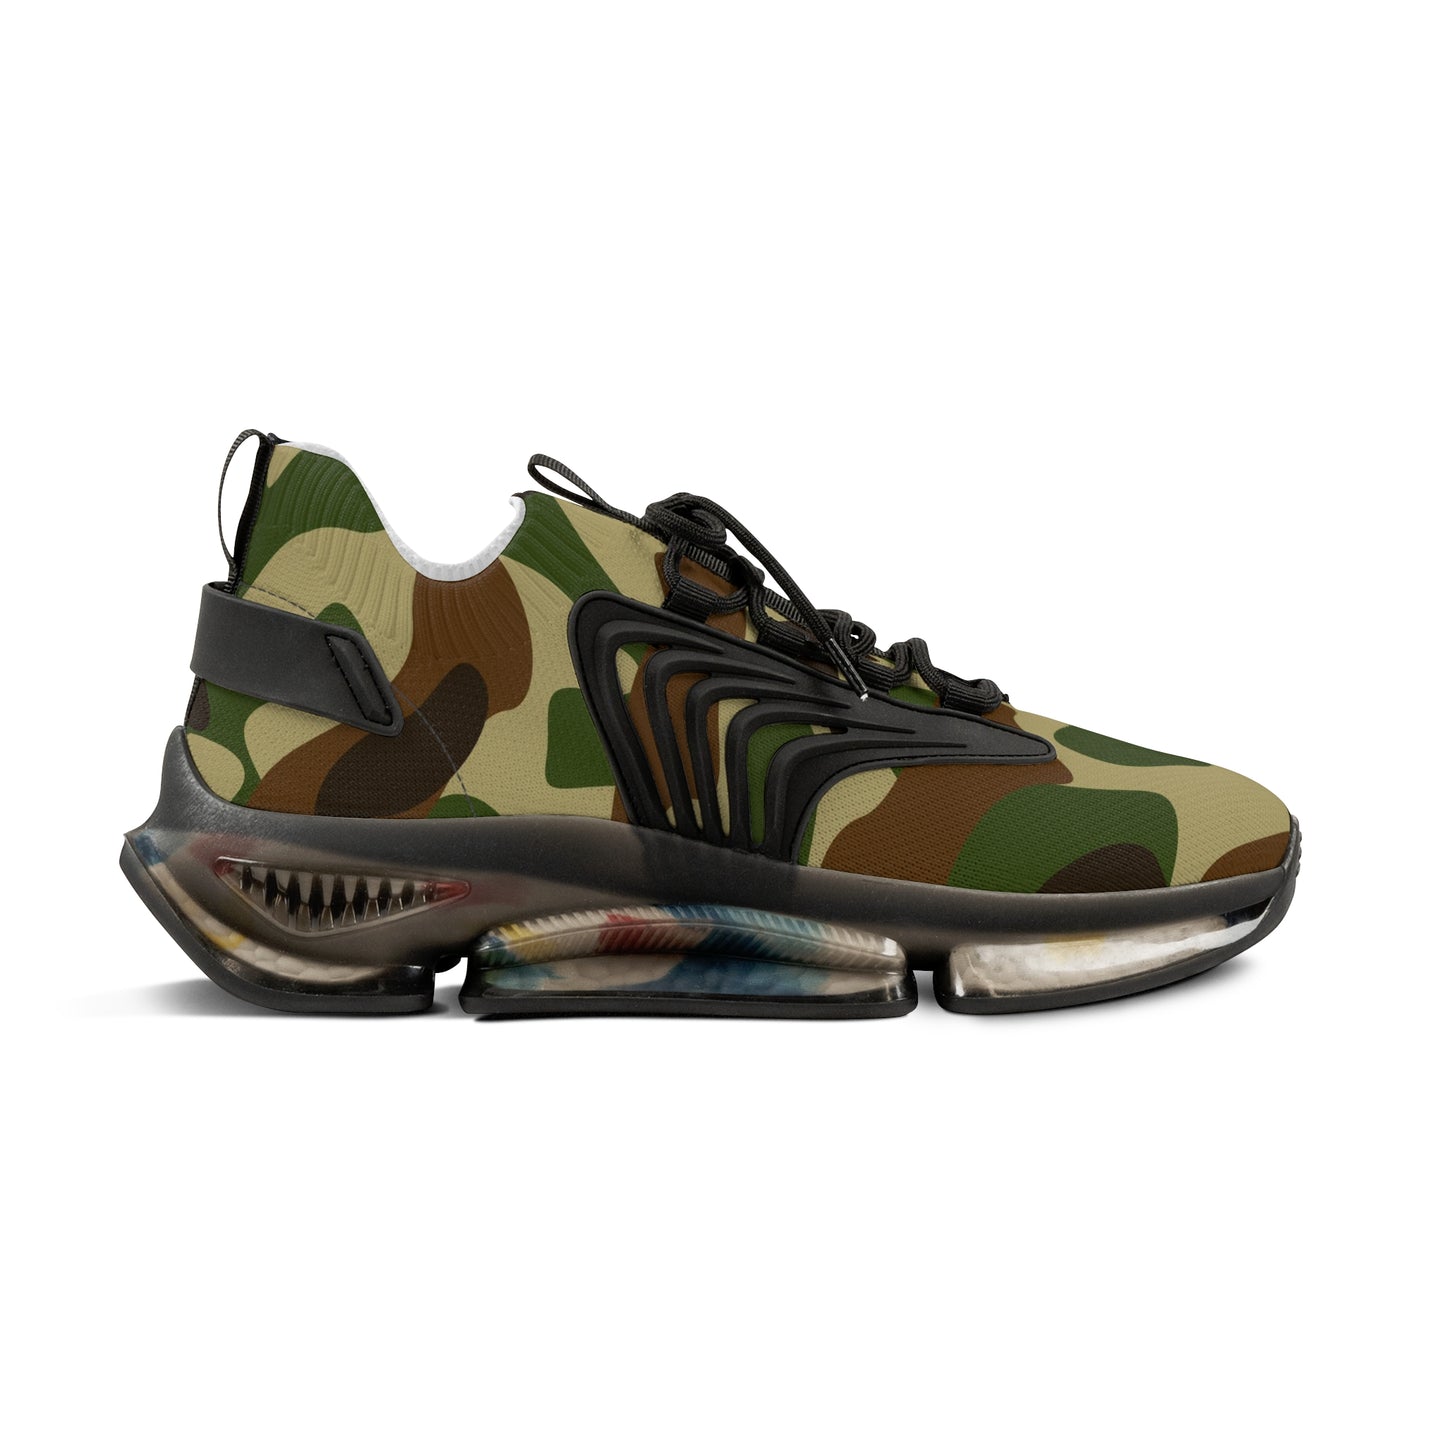 Military Ground Forces Camo Mesh Black Sole Sneakers